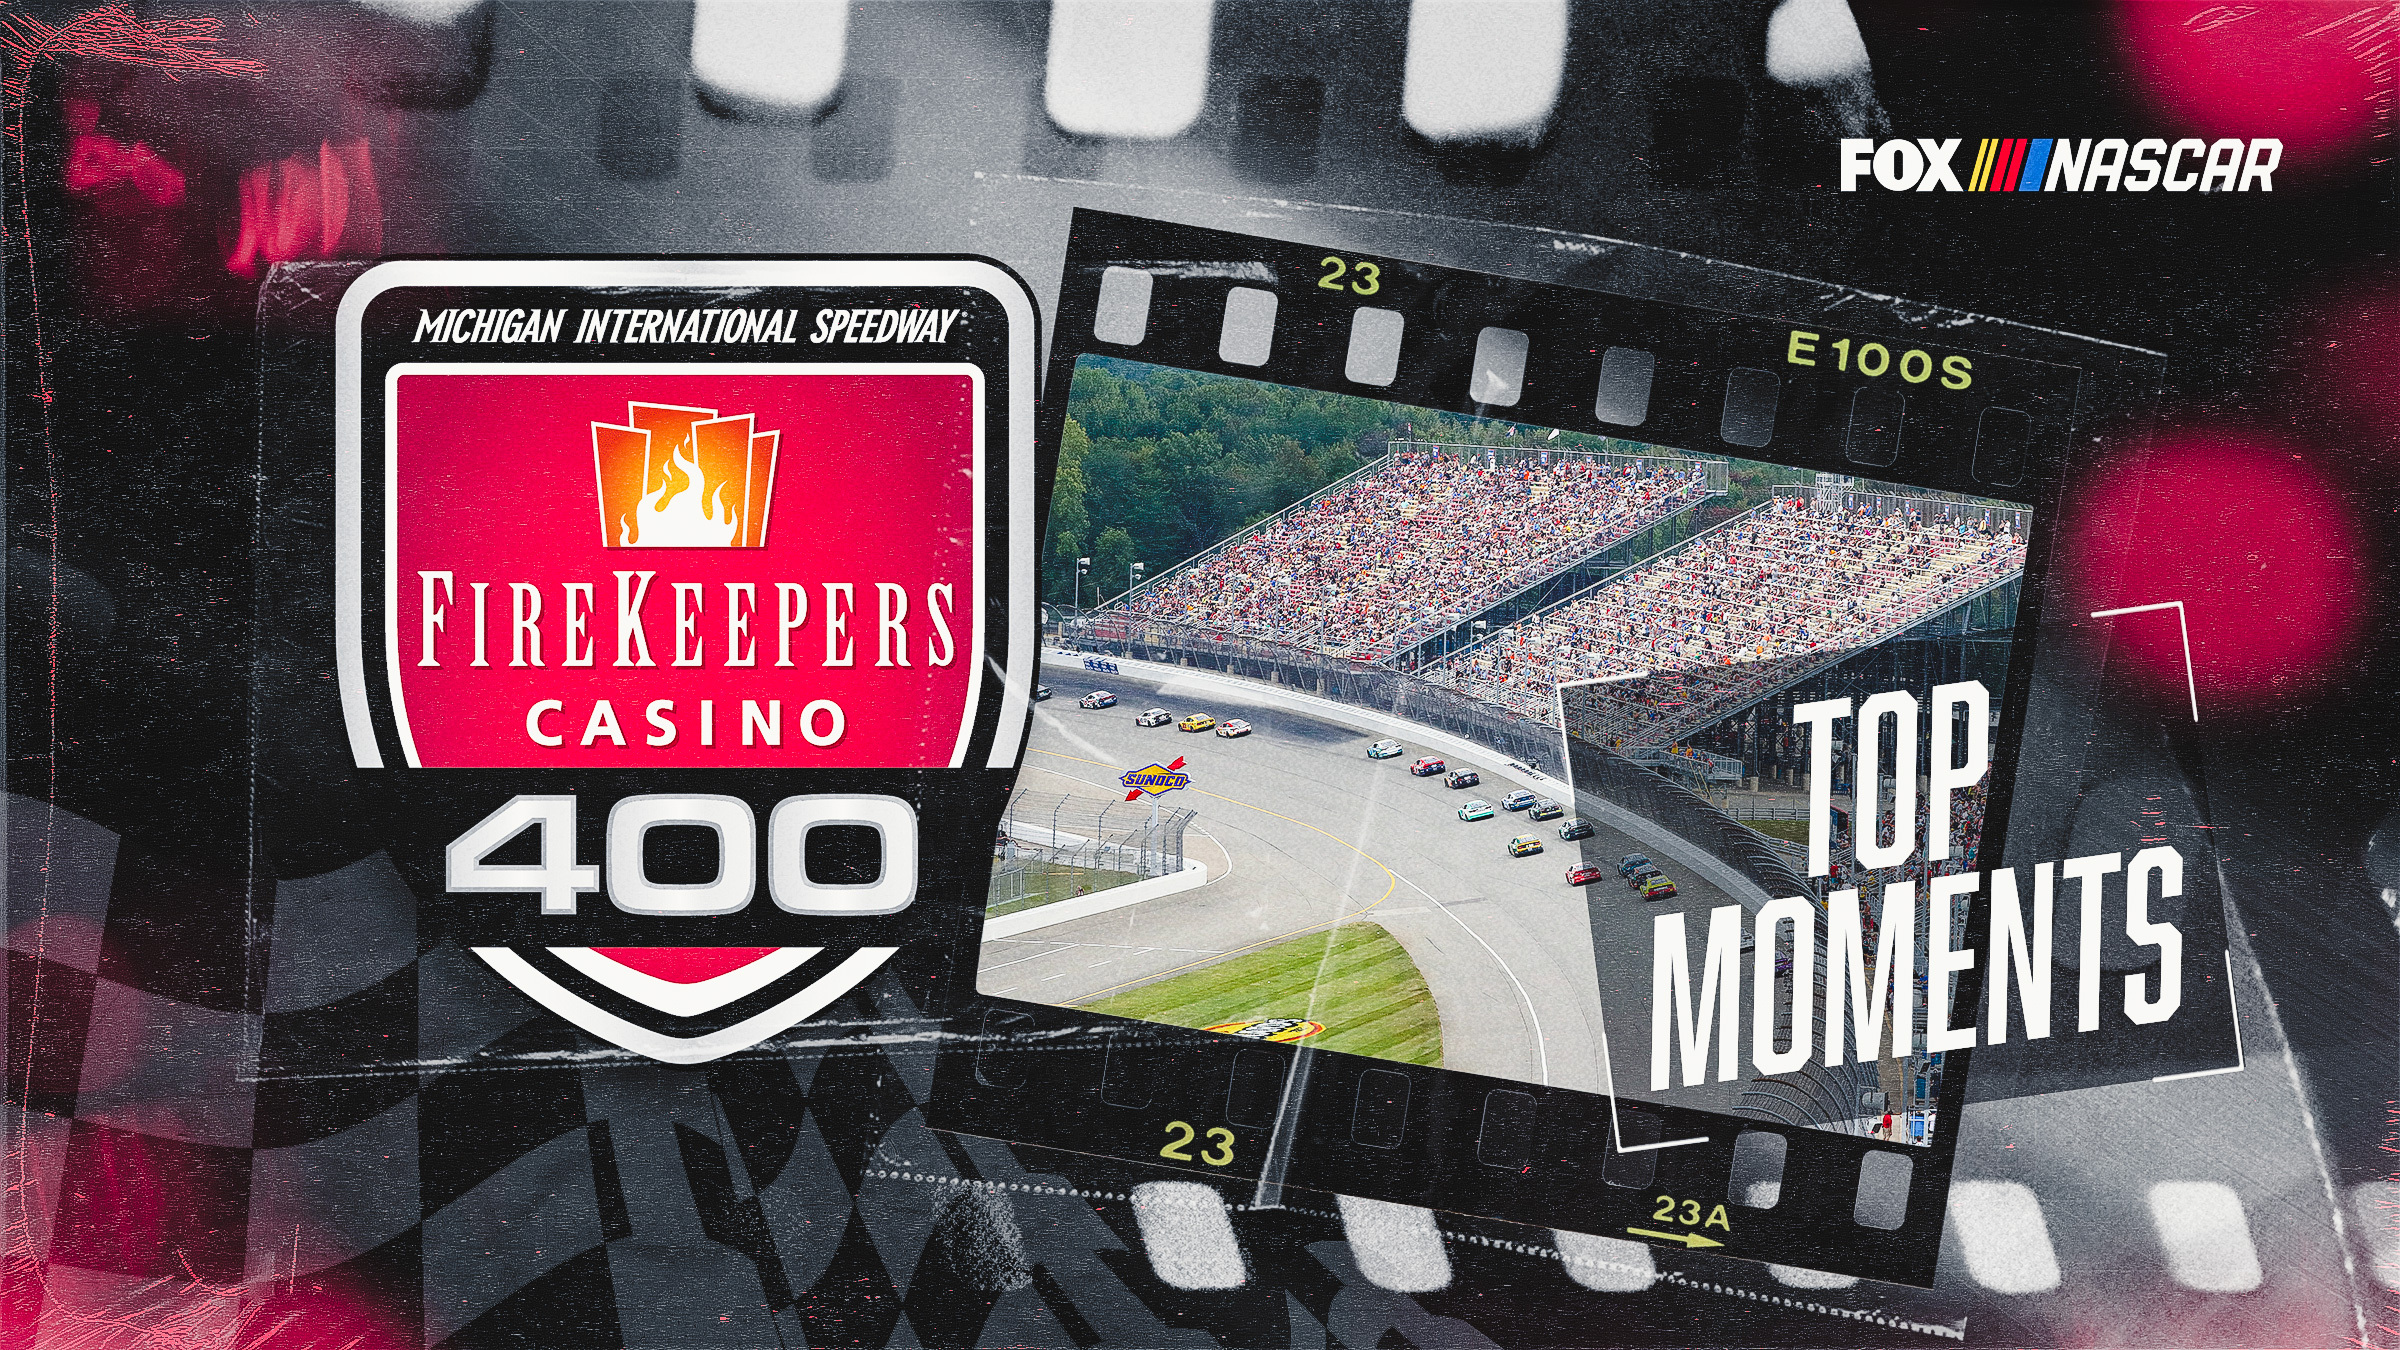 FireKeepers Casino 400 live updates: Top moments from Michigan Int'l Speedway